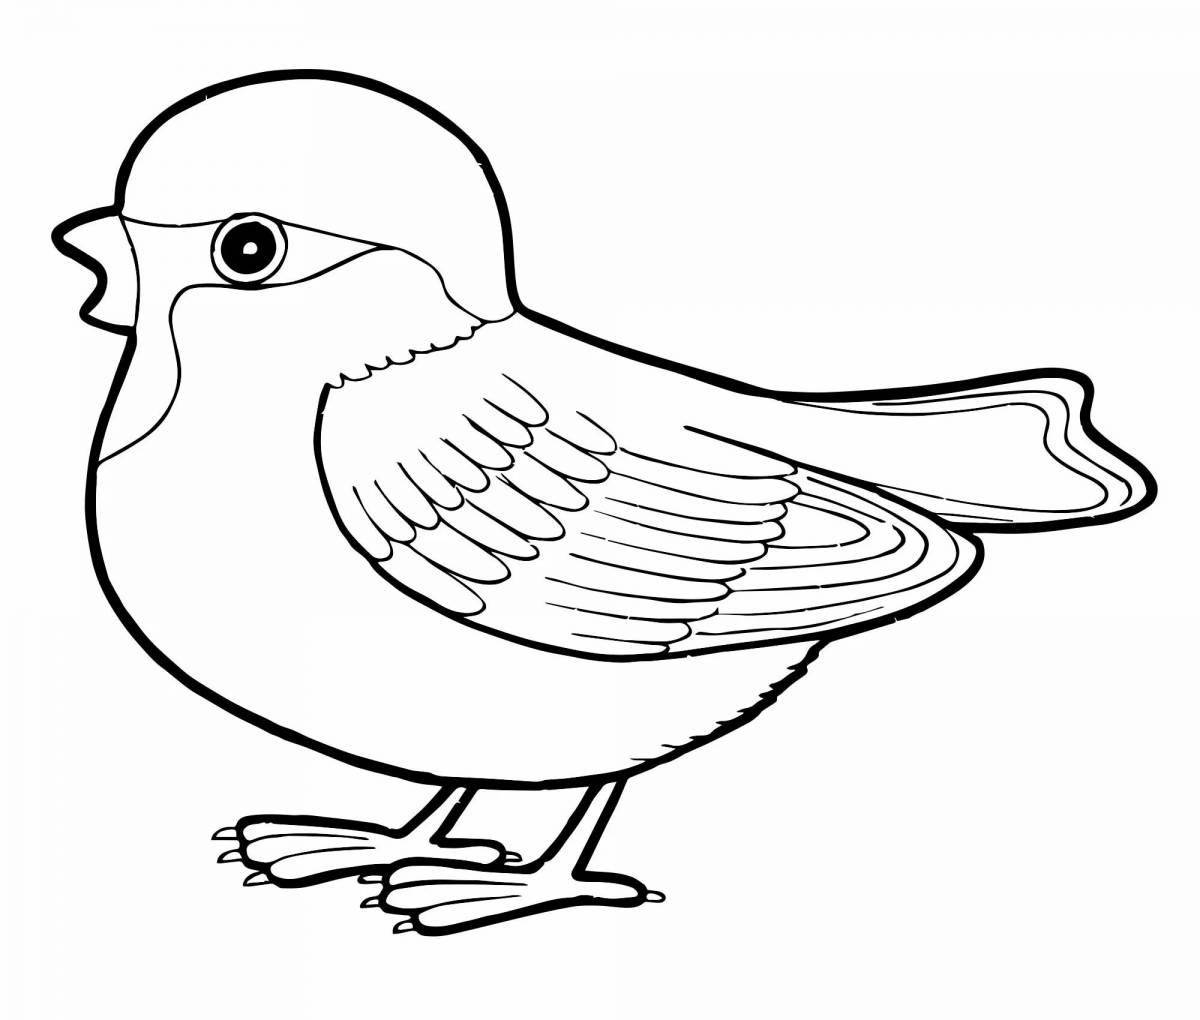 Great bird coloring page for beginners